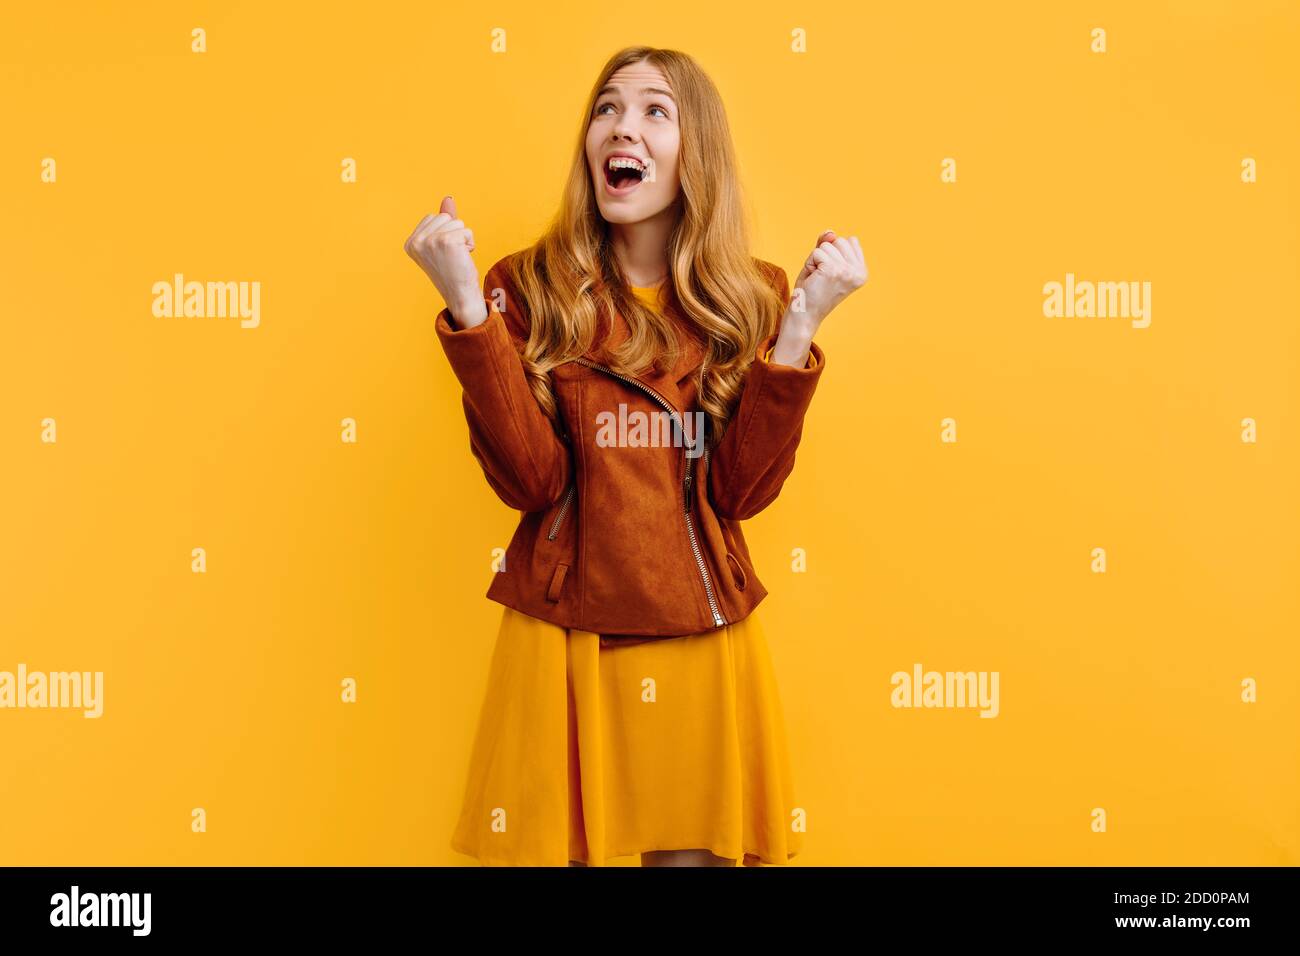 excited shocked screaming happy beautiful girl, in a bright yellow dress and autumn jacket, happily shows a winning gesture while standing on an isola Stock Photo